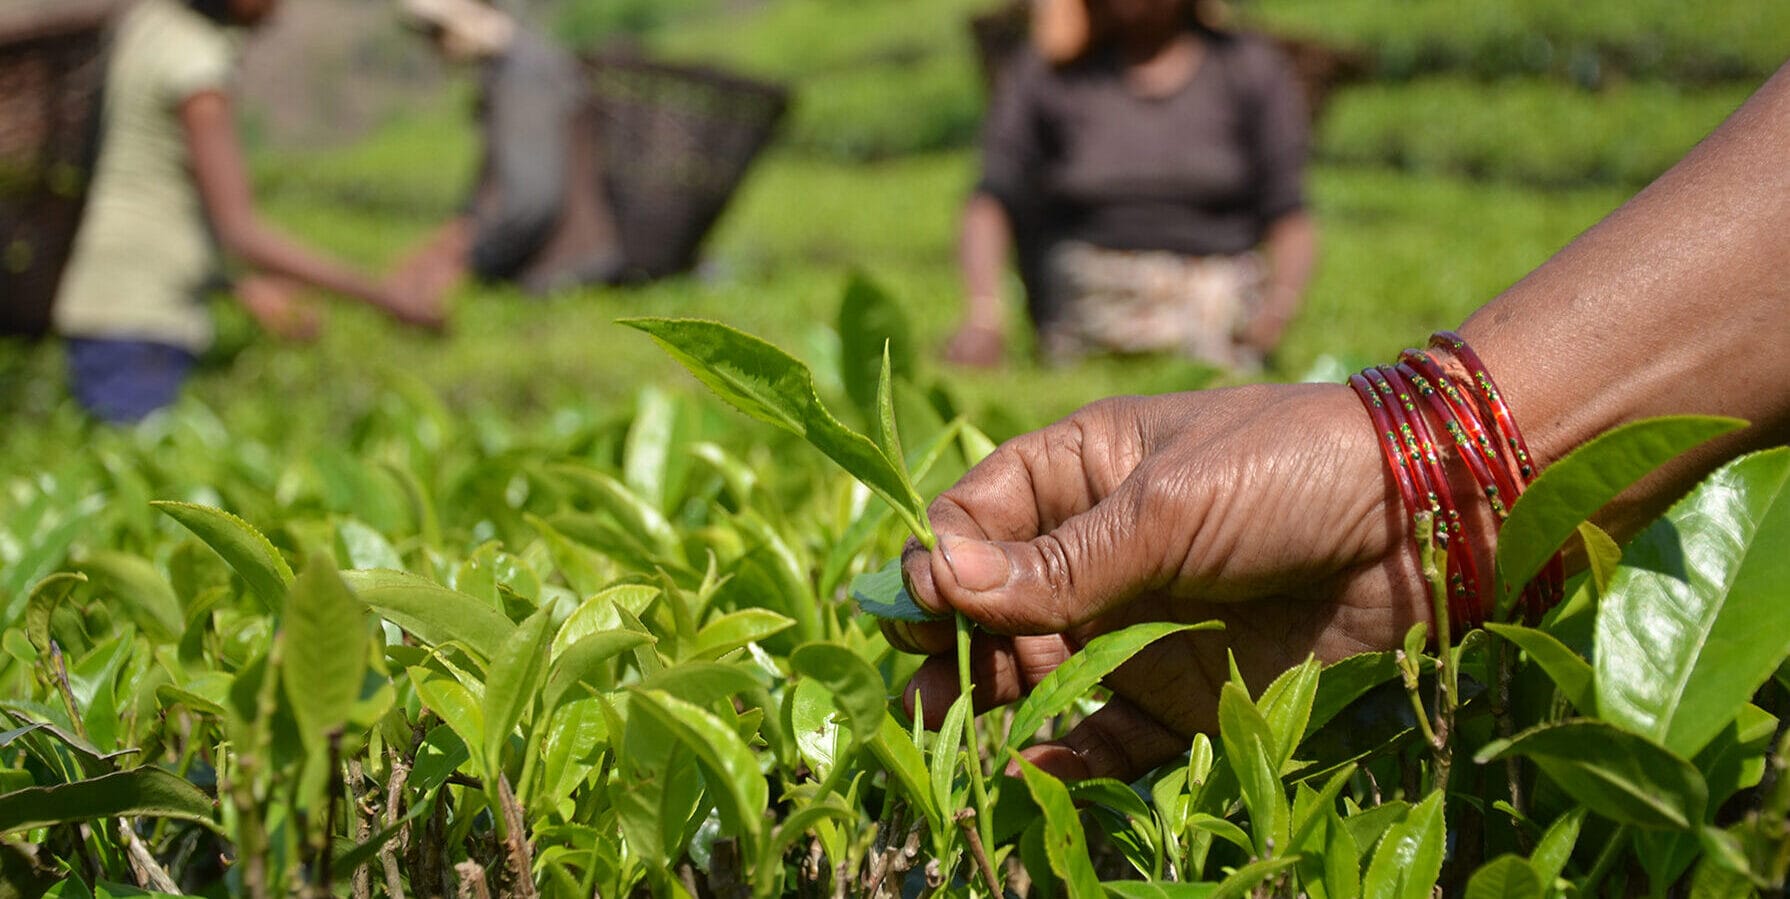 A close-up image of a hand plucking a small herb on a farm.